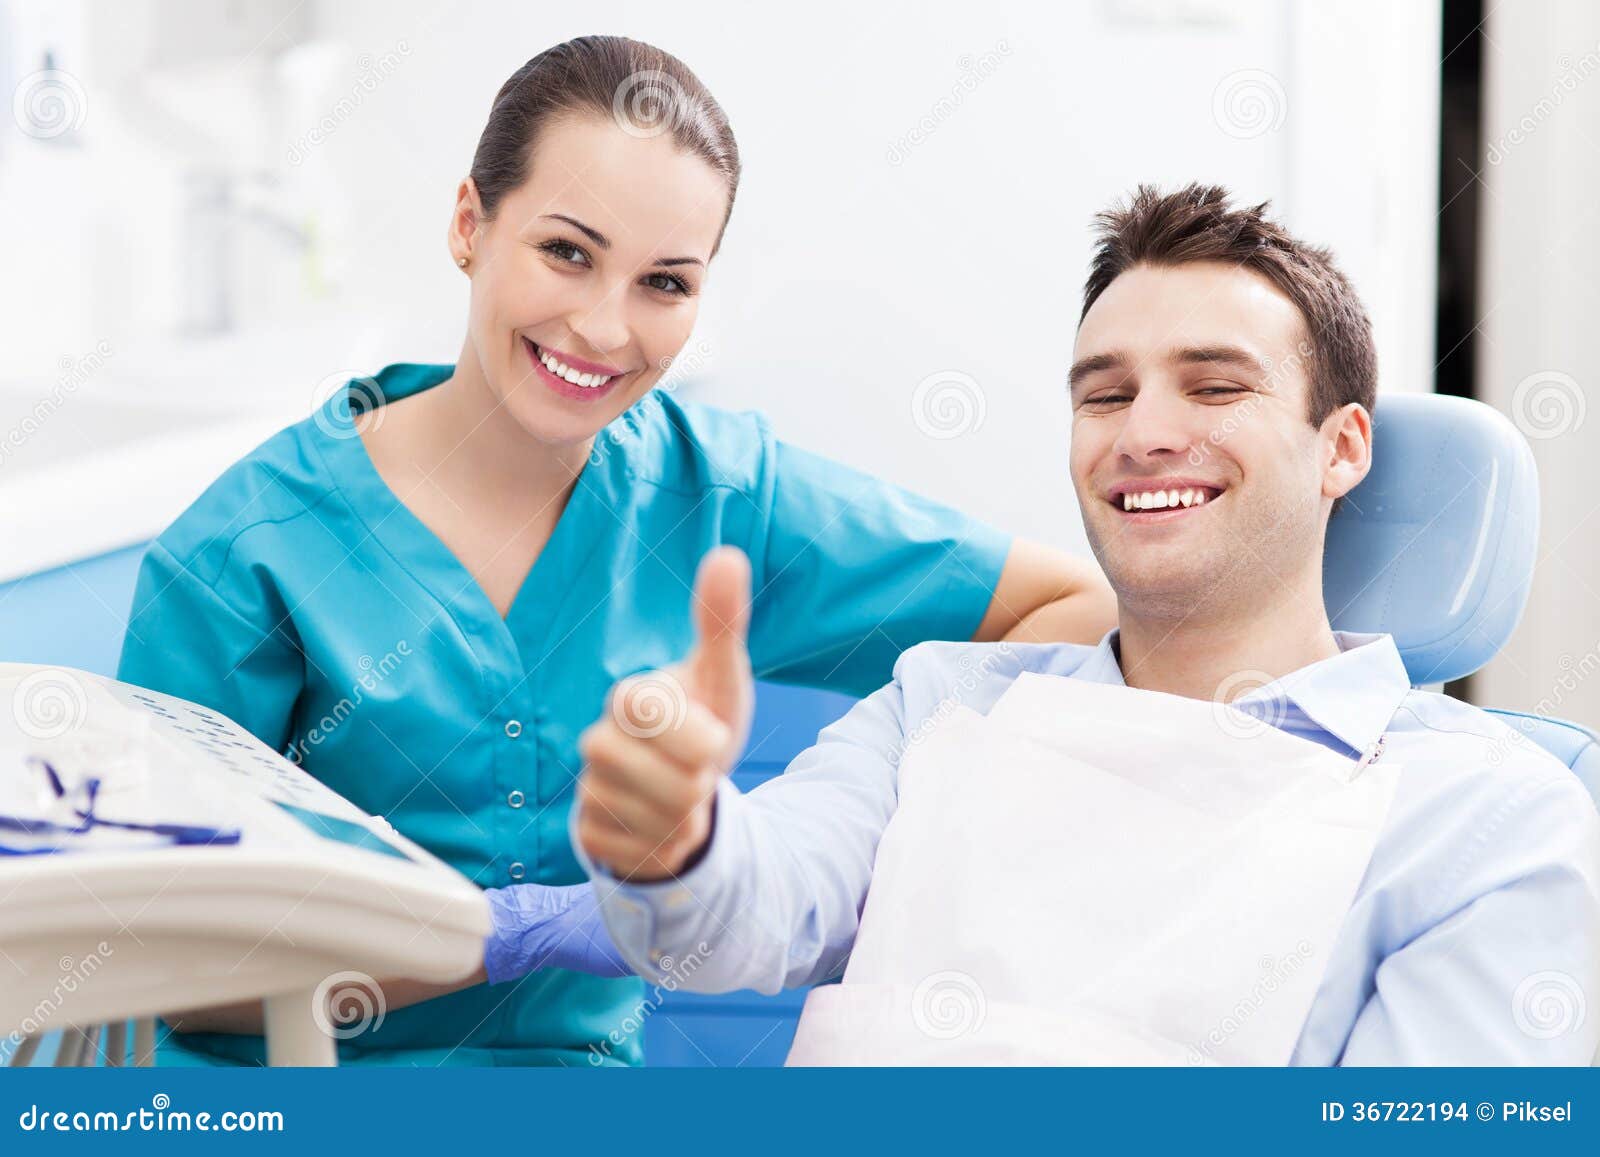 man giving thumbs up at dentist office